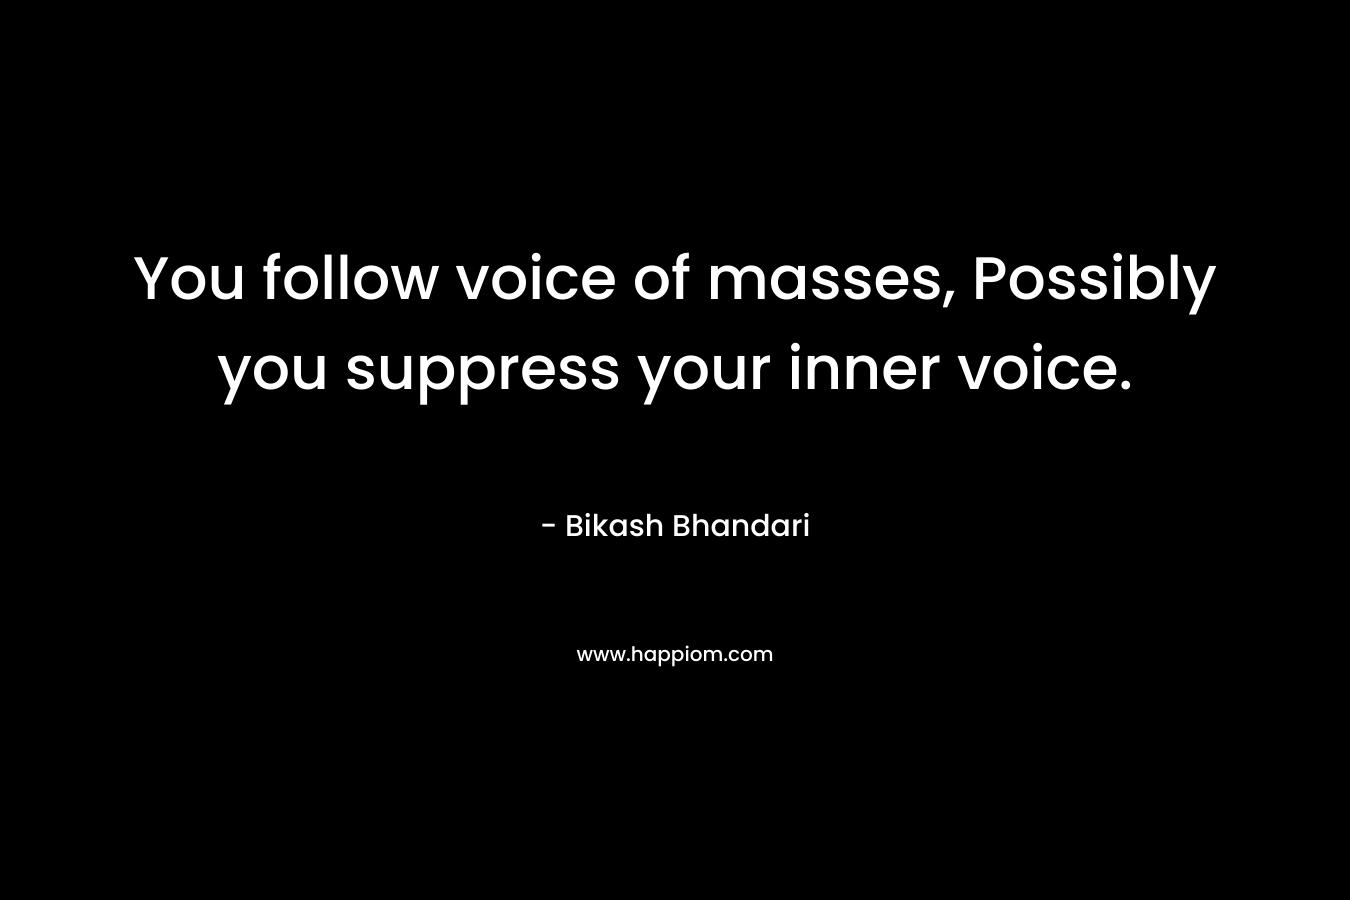 You follow voice of masses, Possibly you suppress your inner voice. – Bikash Bhandari